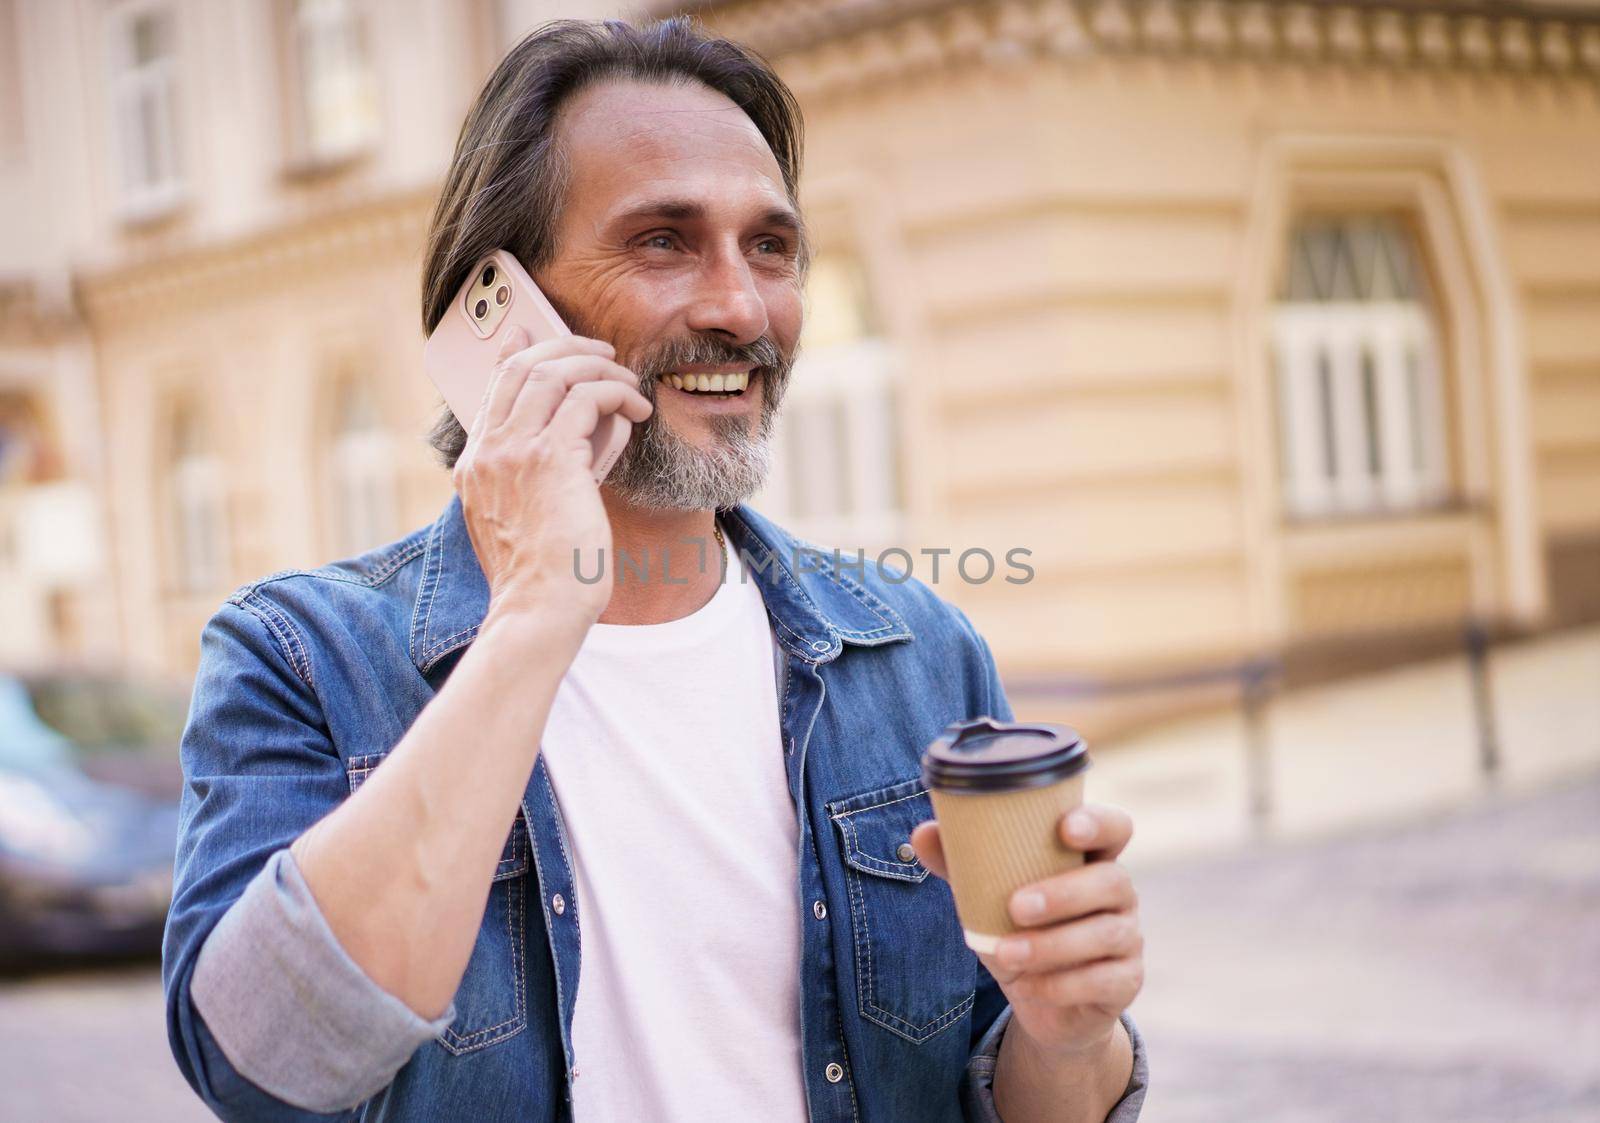 Happy middle aged man with grey bearded talking on the phone holding coffee in disposable paper cup standing outdoors in old city background wearing jeans shirt. Freelancer traveling man.